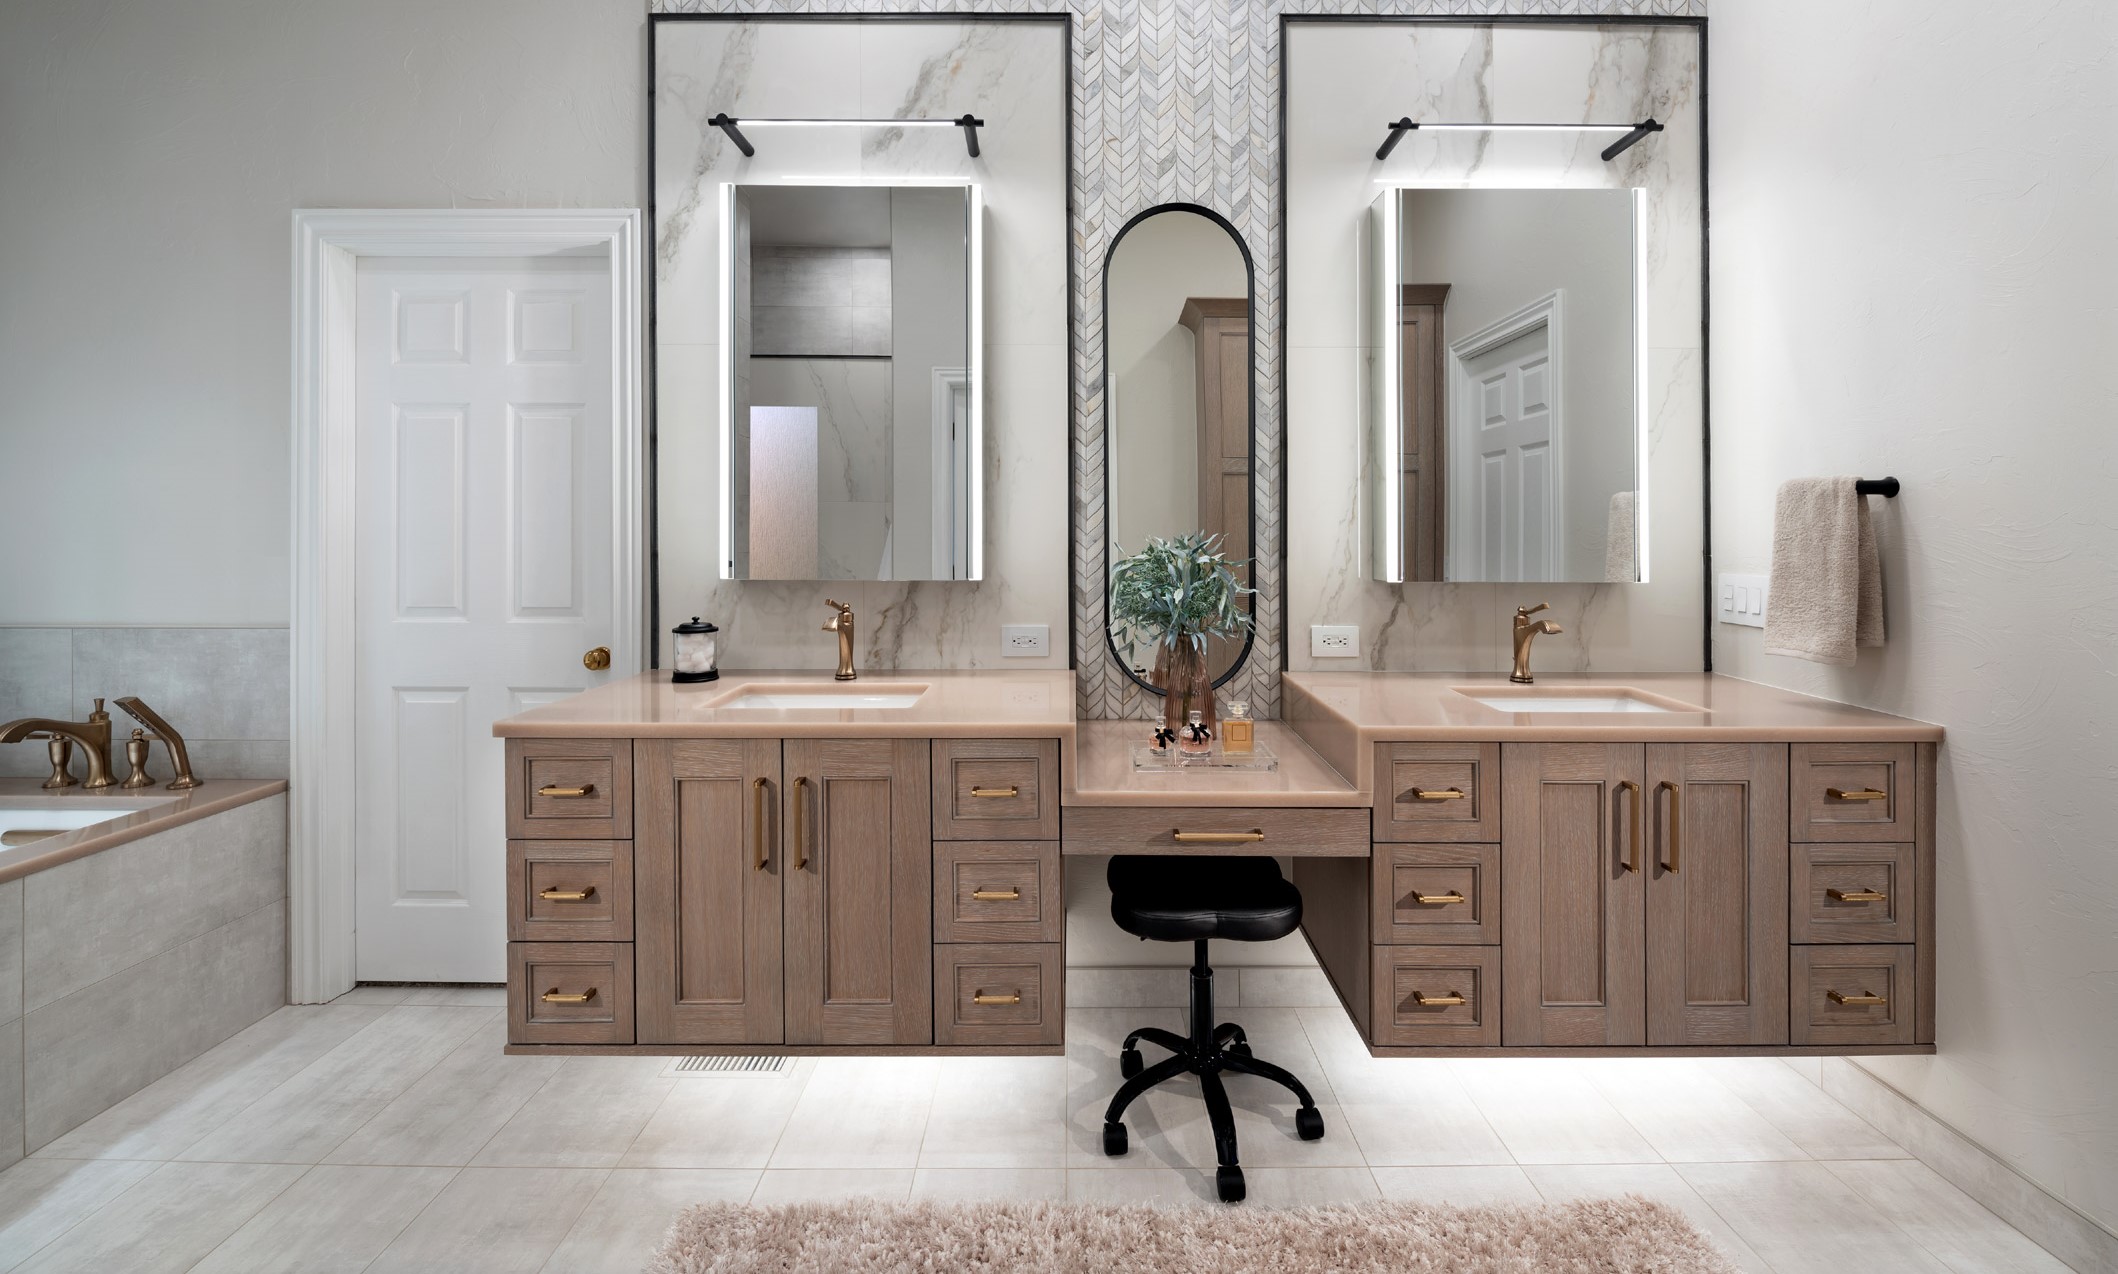 Custom Floating Vanity with integrated lighting and pull out storage